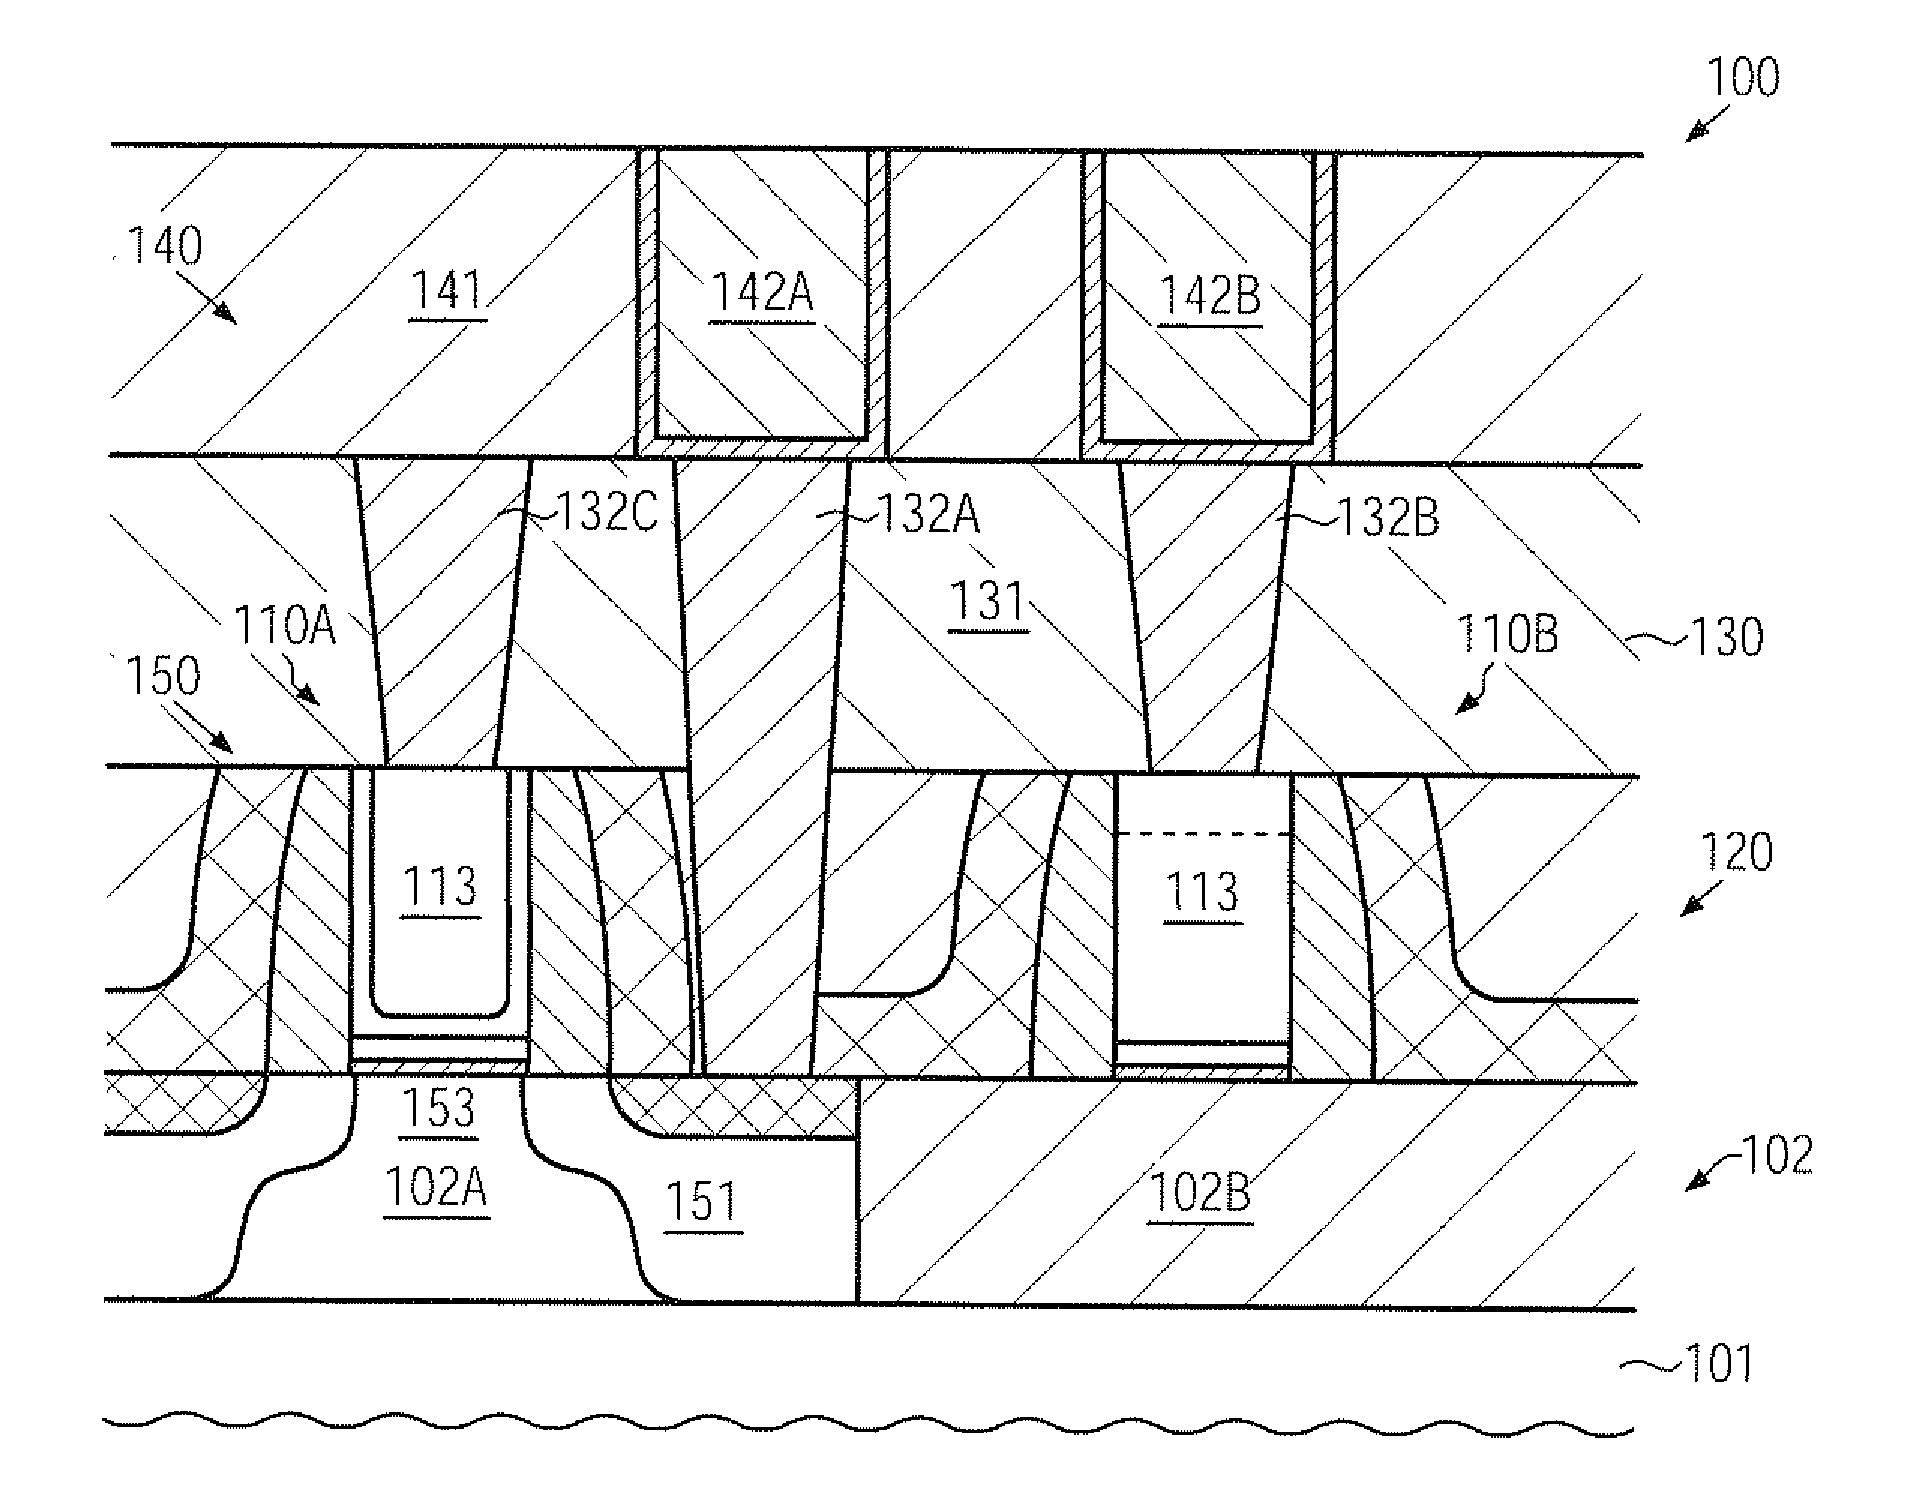 Semiconductor fuses in a semiconductor device comprising metal gates